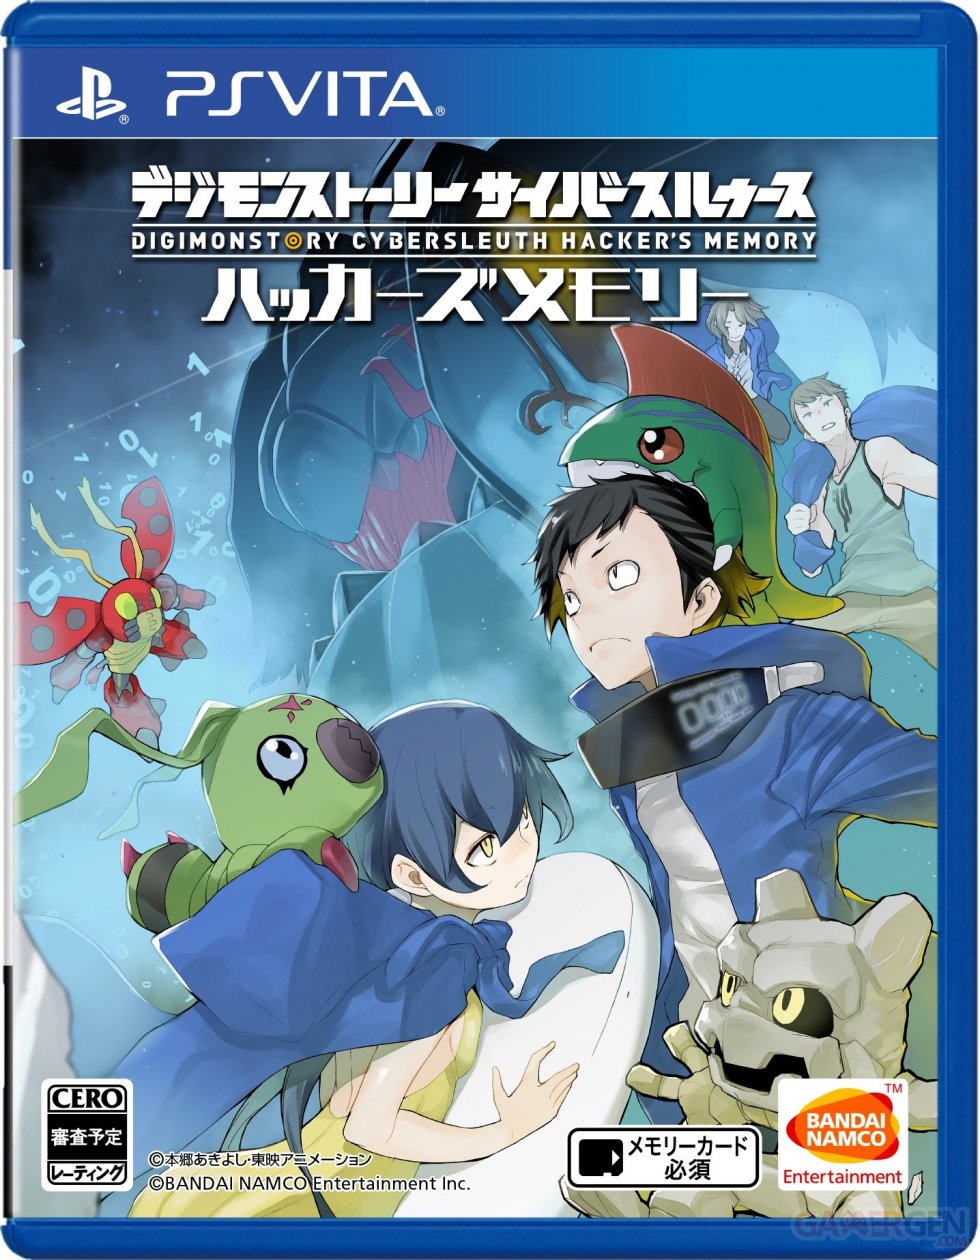 Digimon-Story-Cyber-Sleuth-Hackers-Memory-jaquette-jp-psvita-21-07-2017